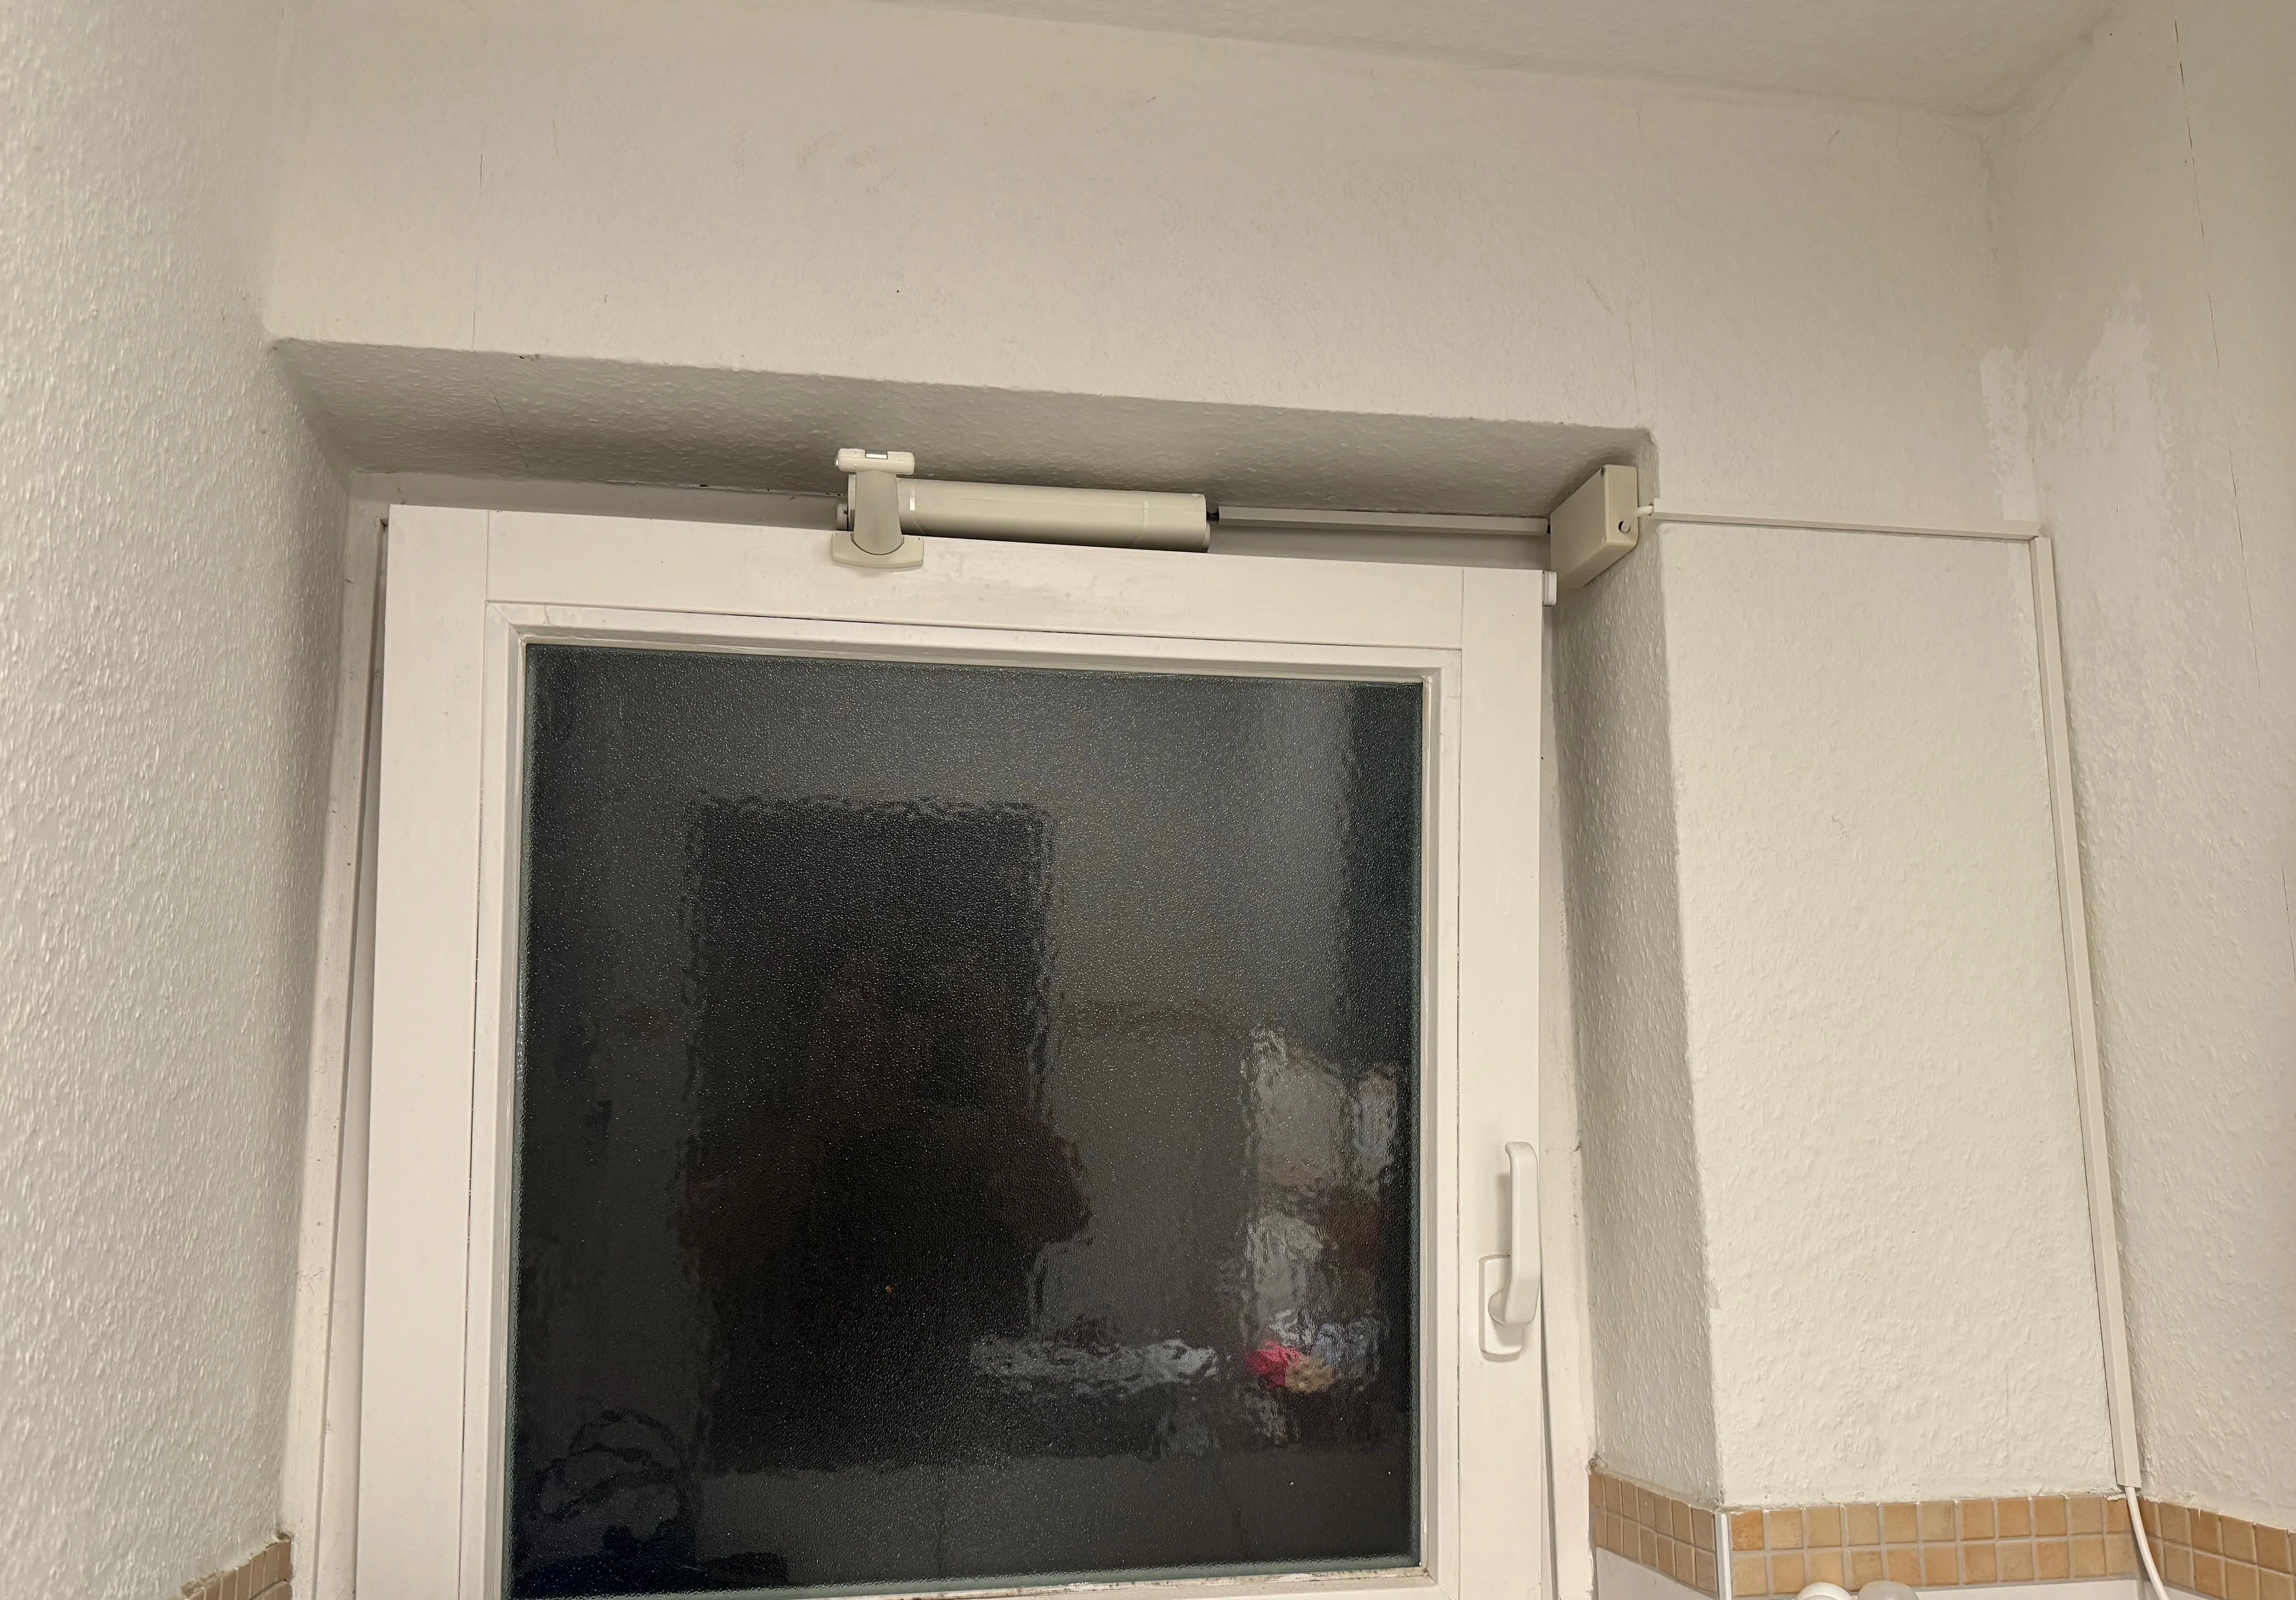 Picture of the bathroom window with the window opener installed